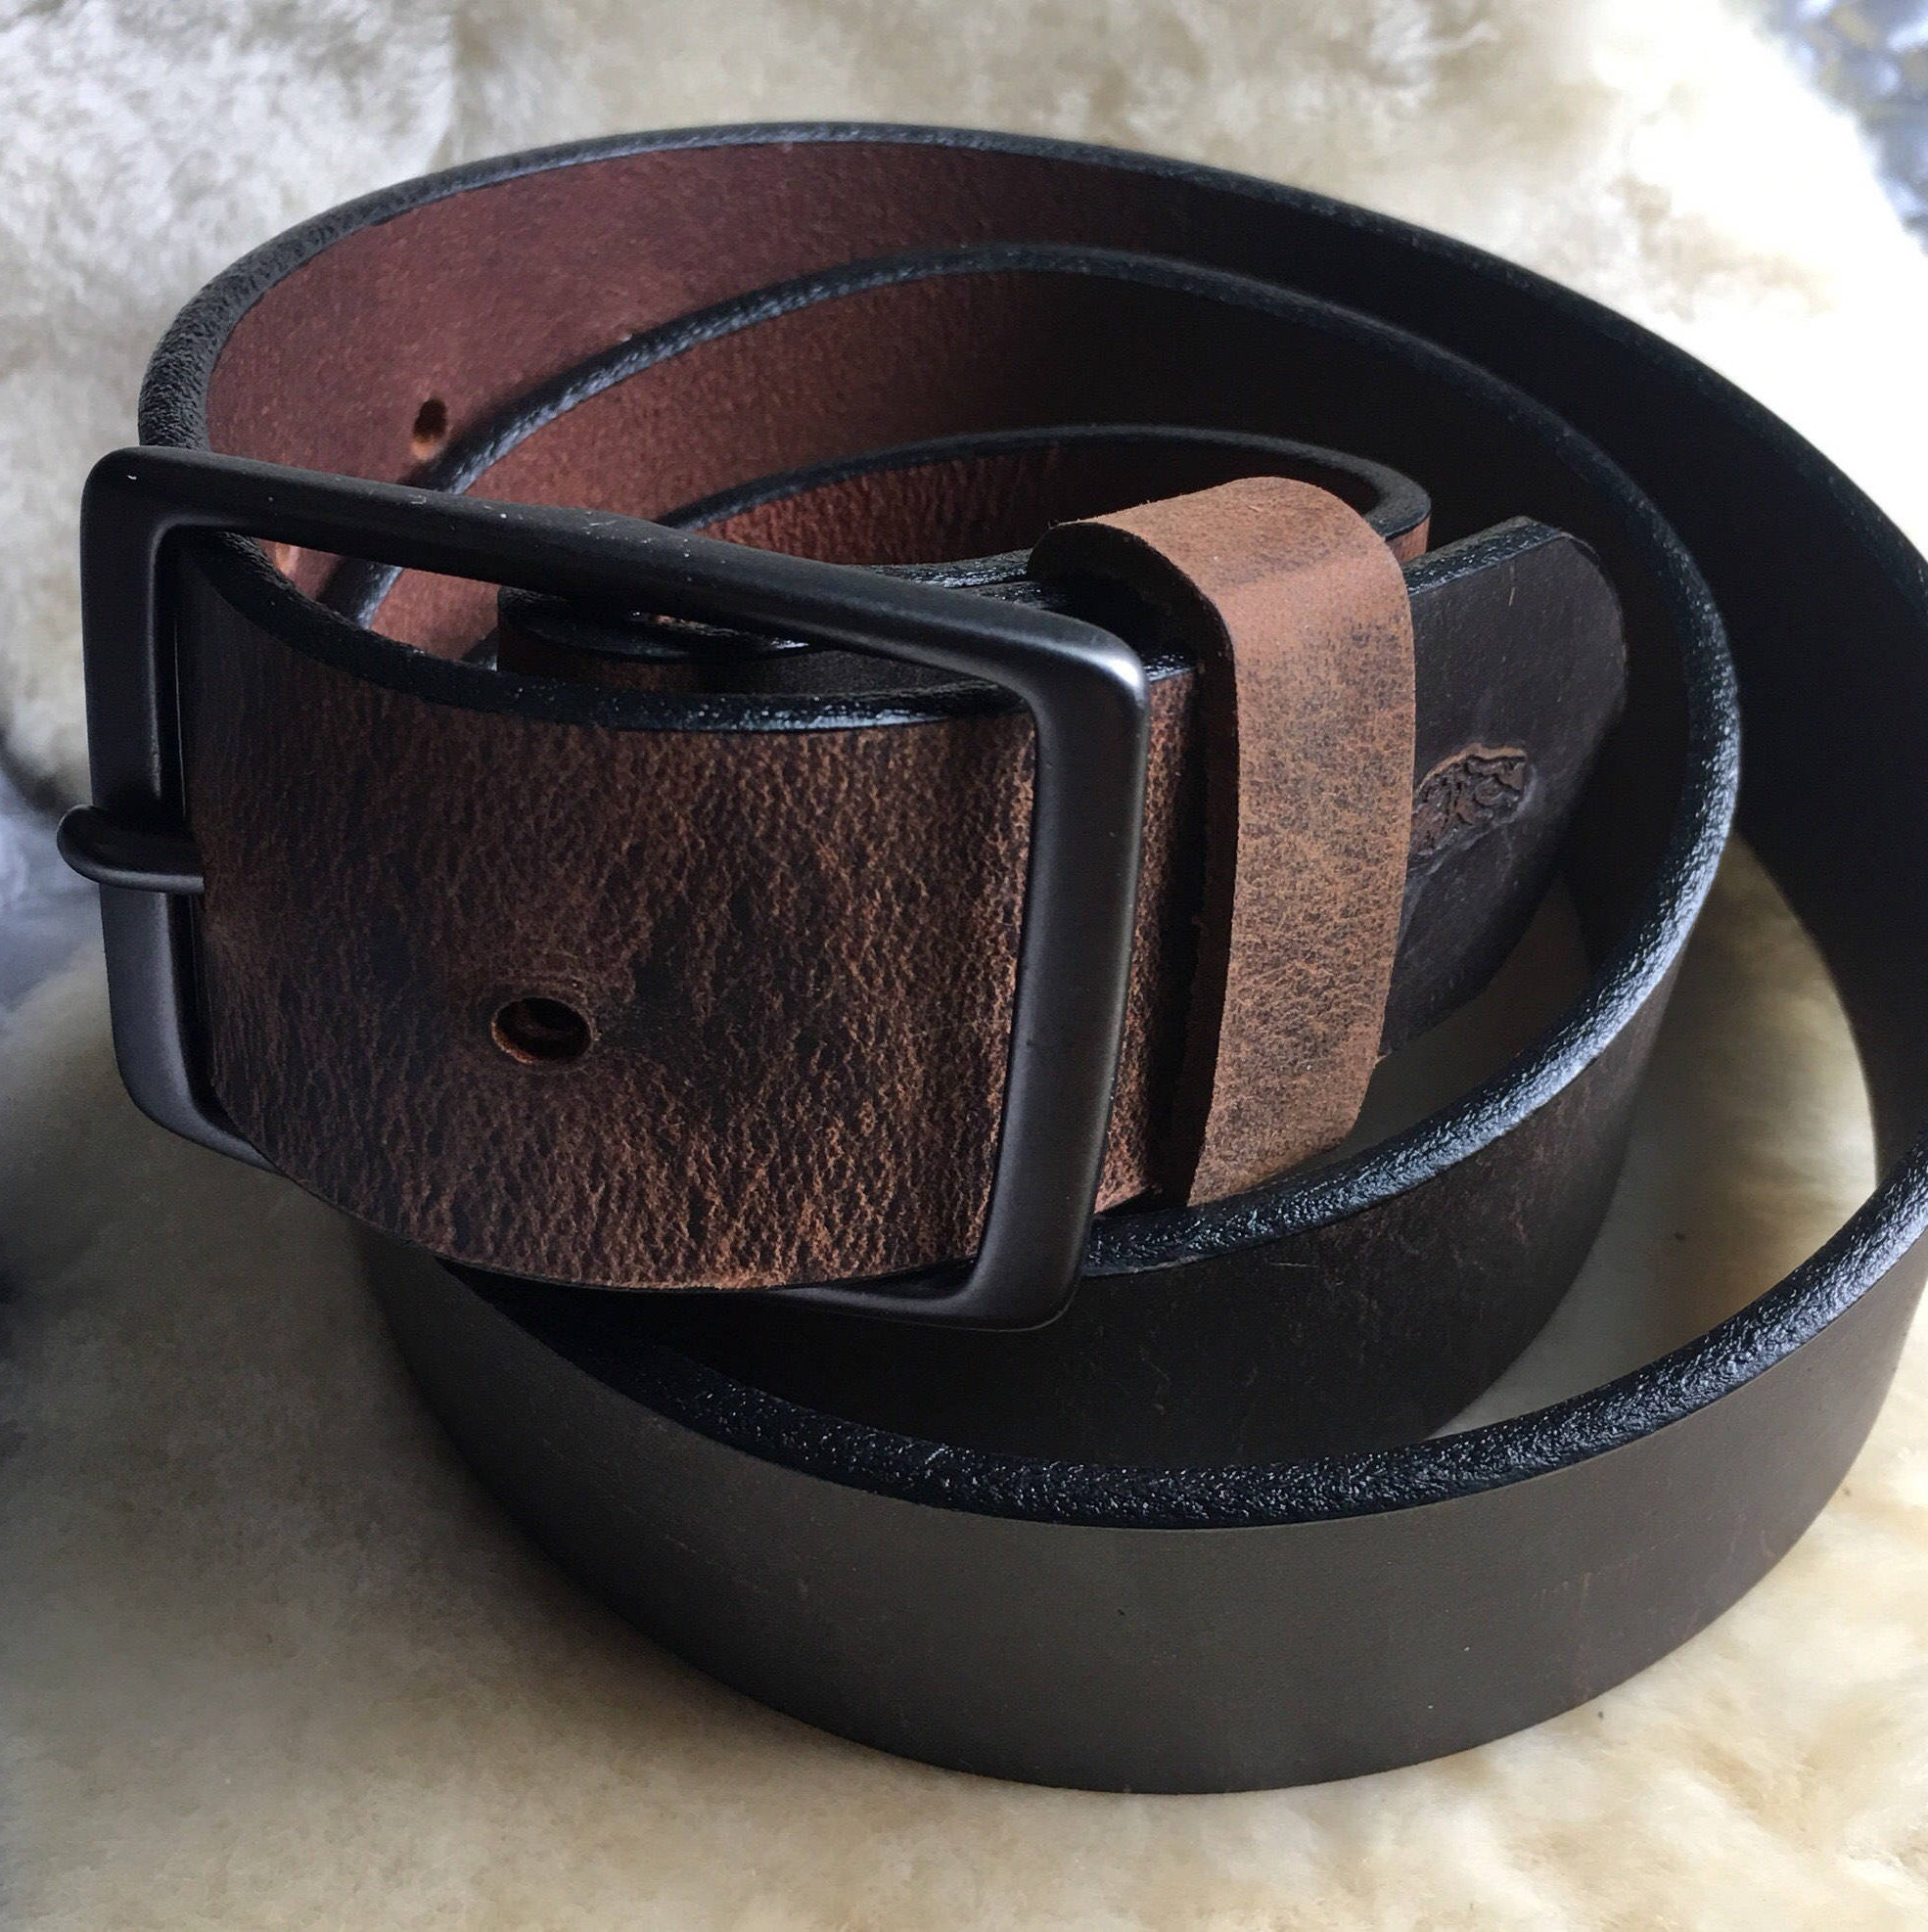 Bison/Buffalo Leather Belt with Brass Buckle